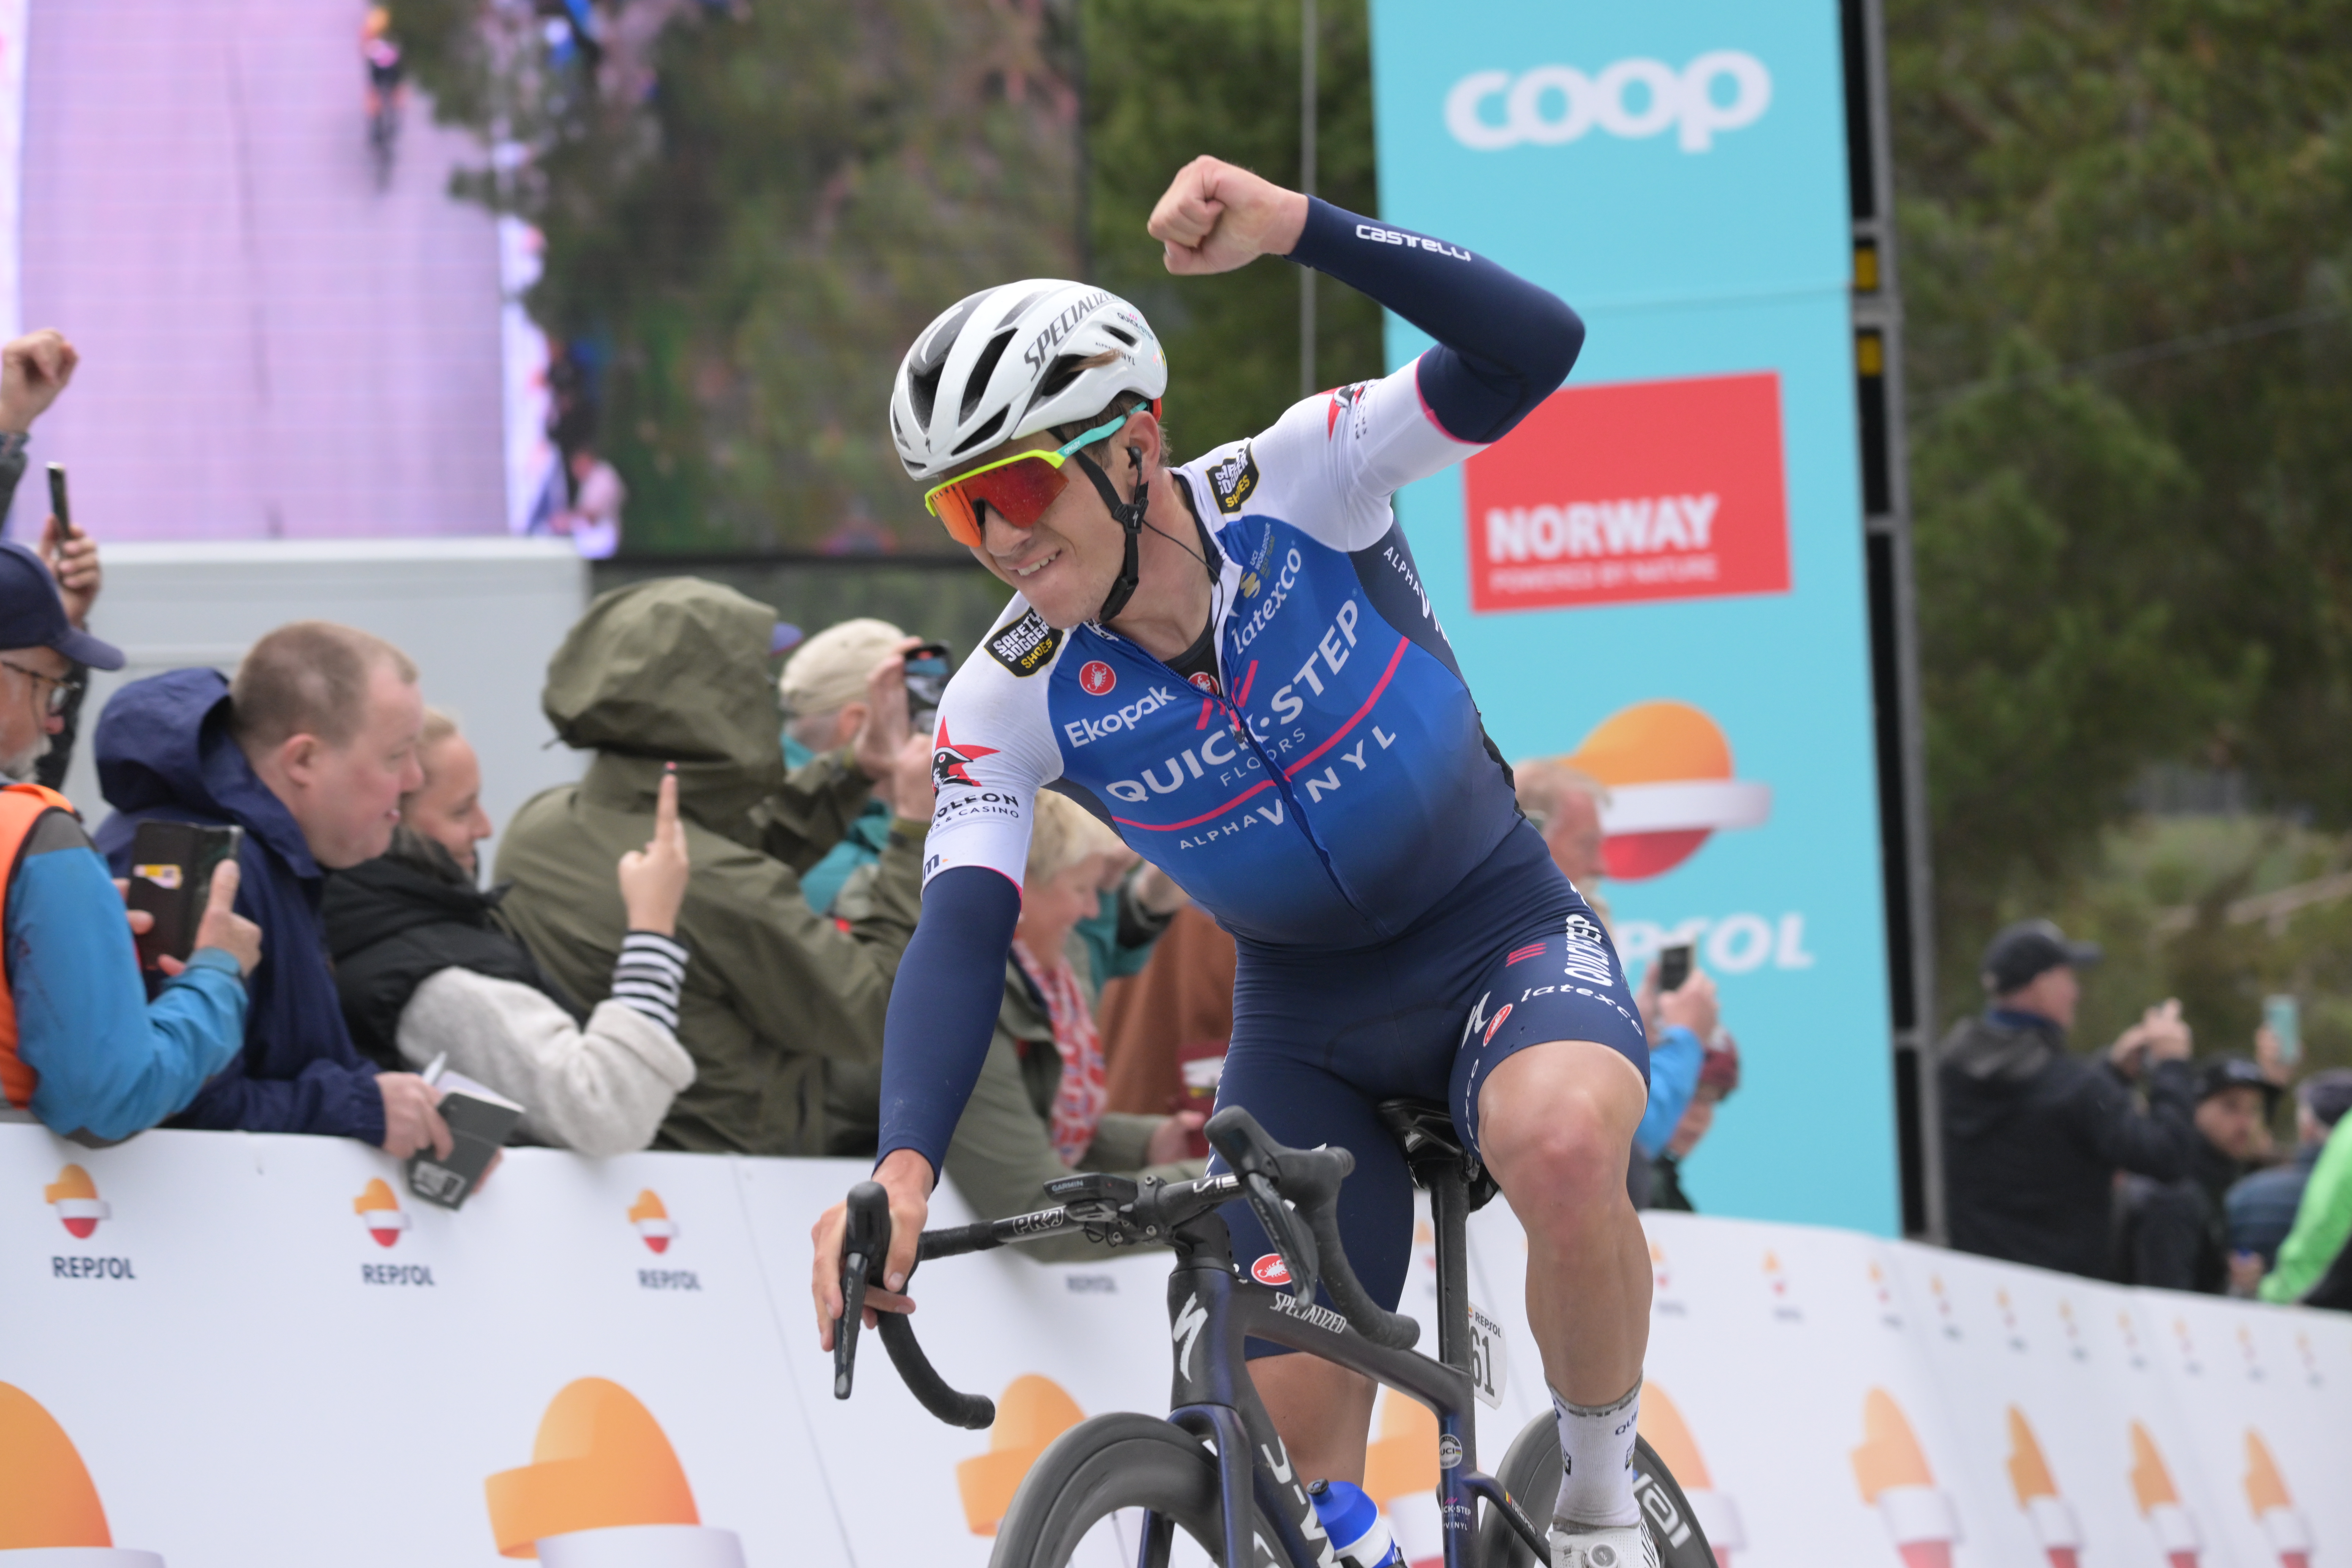 Remco Evenepoel wins the opening stage of Tour of Norway 2022!